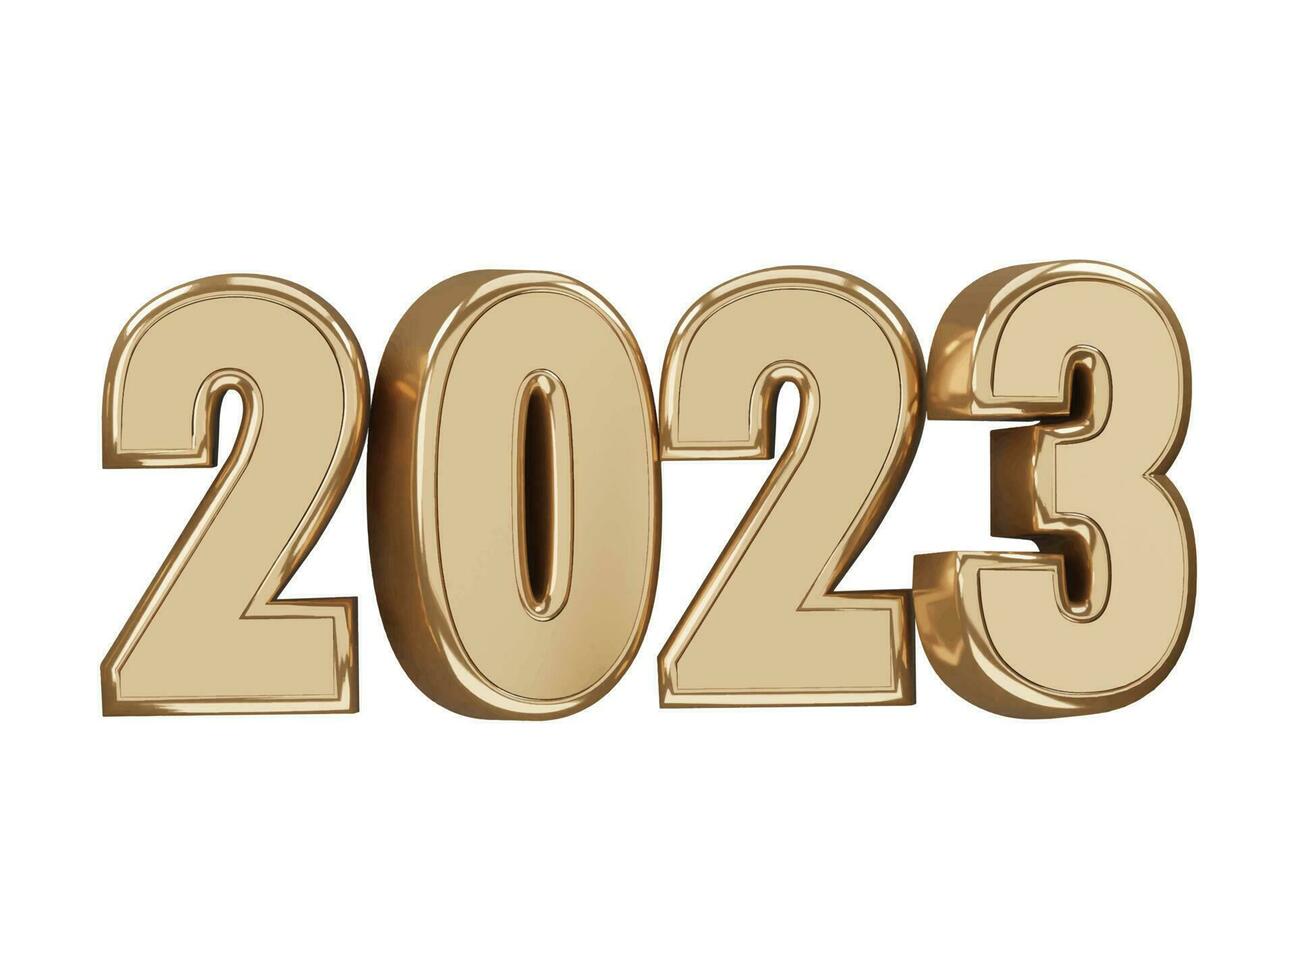 Realistic 3d rendering 2023 new year text effect vector